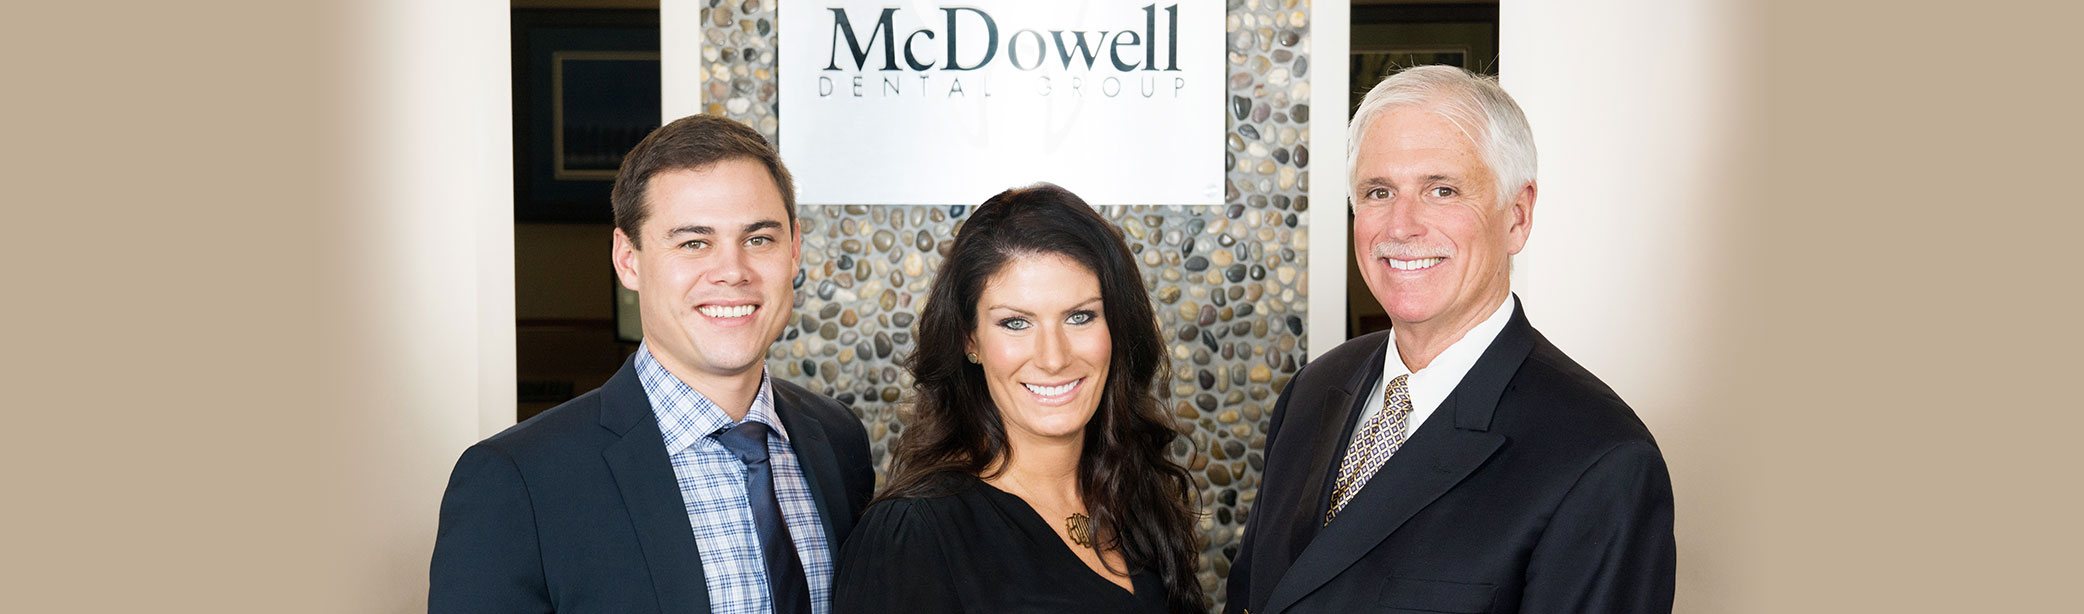 Our Dentists at McDowell Dental Group